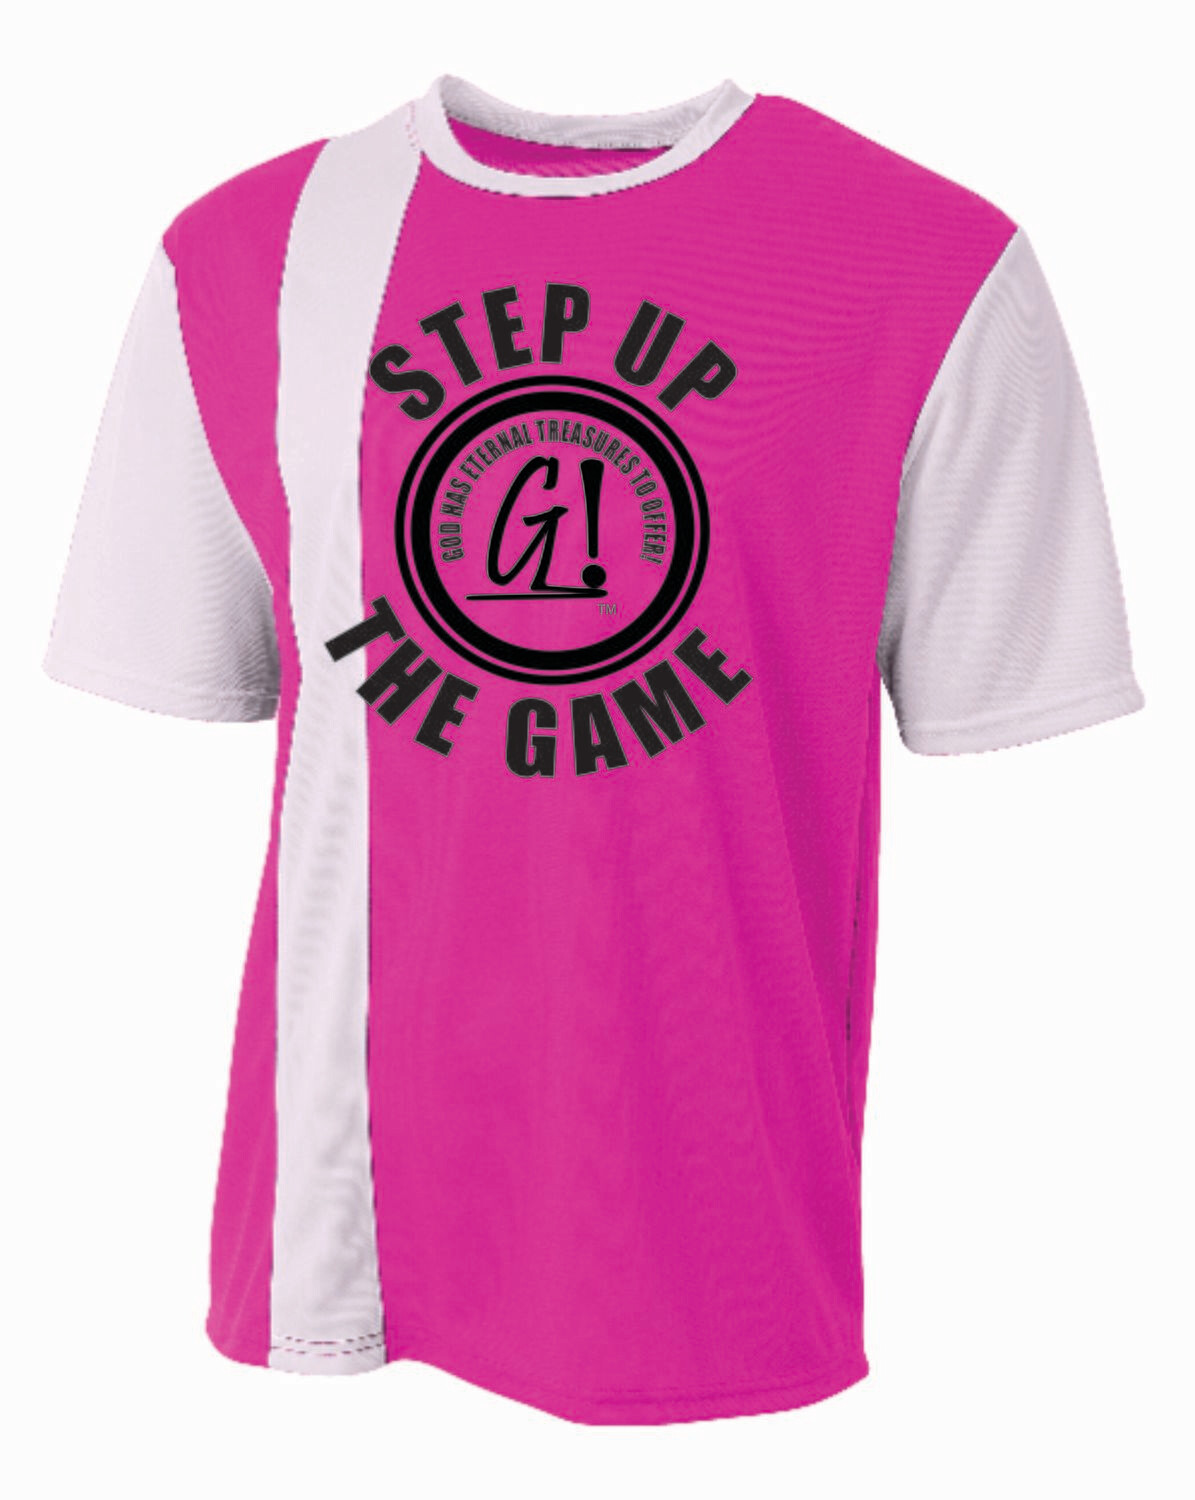 Step Up The Game G! T-Shirt